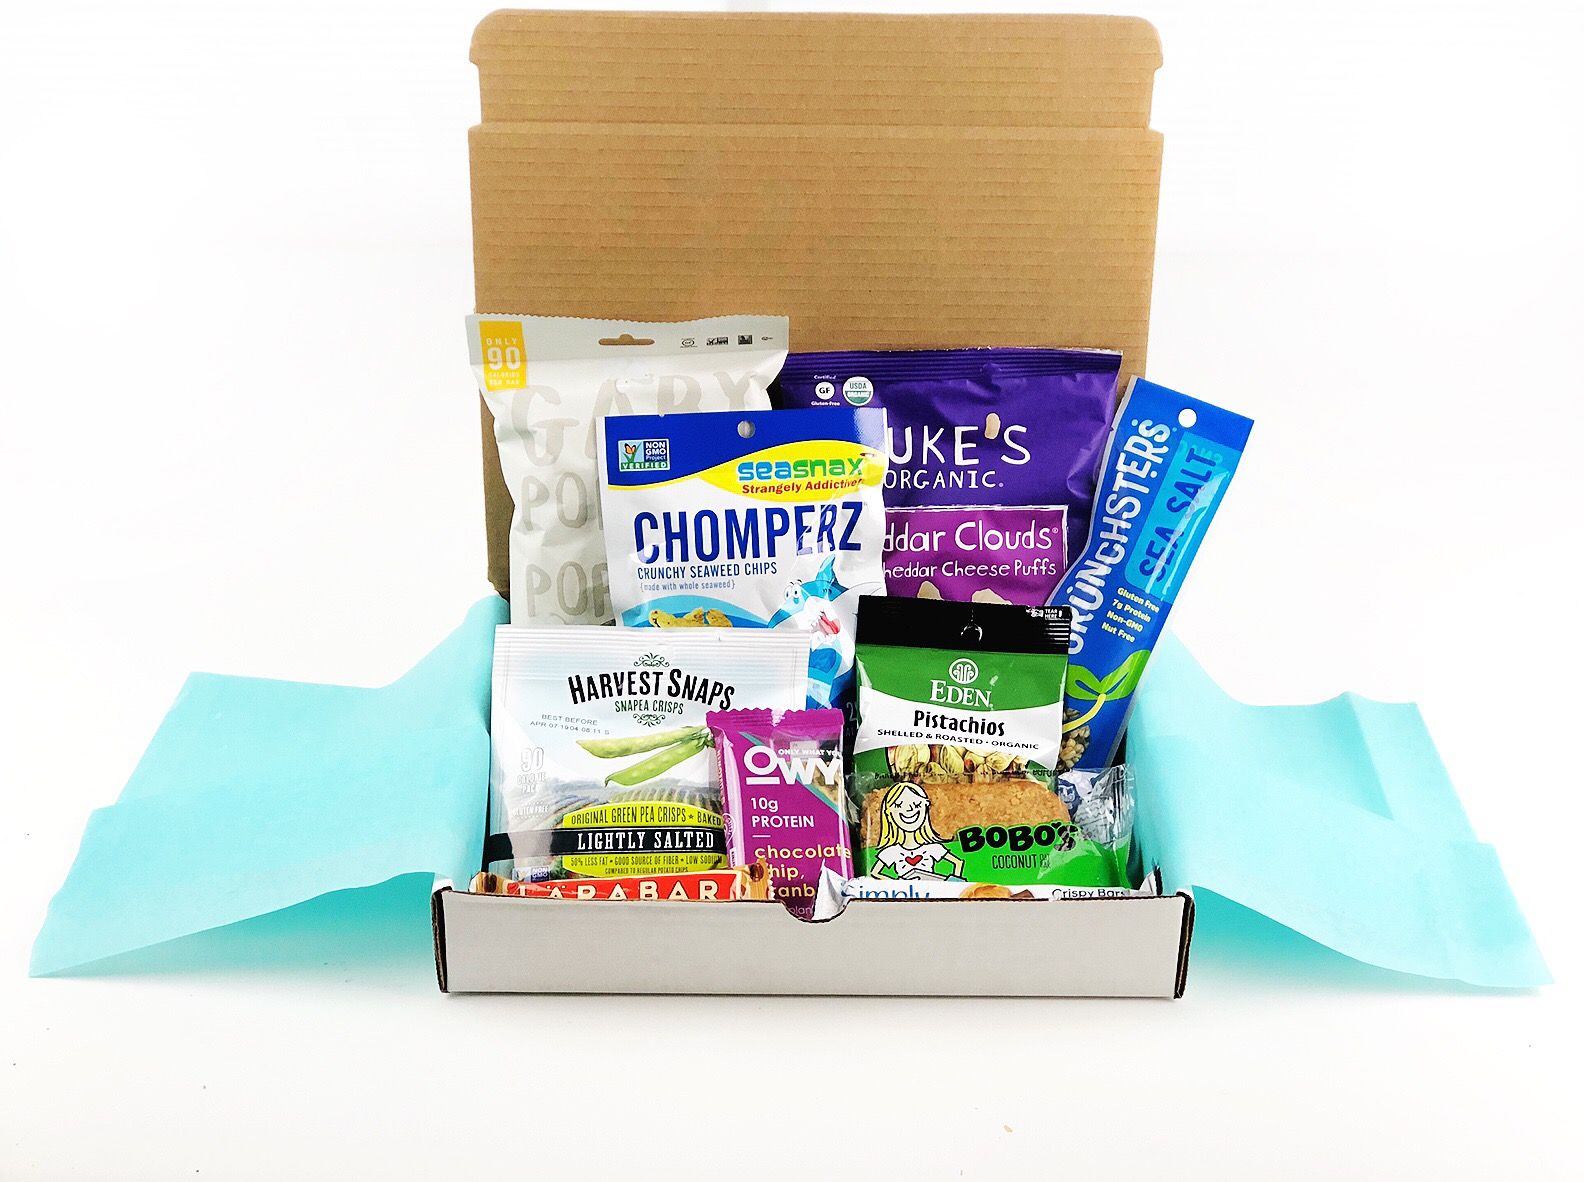 HealthyMe Living Snack Box MSA Exclusive Coupon: New Customers Get 20% Off